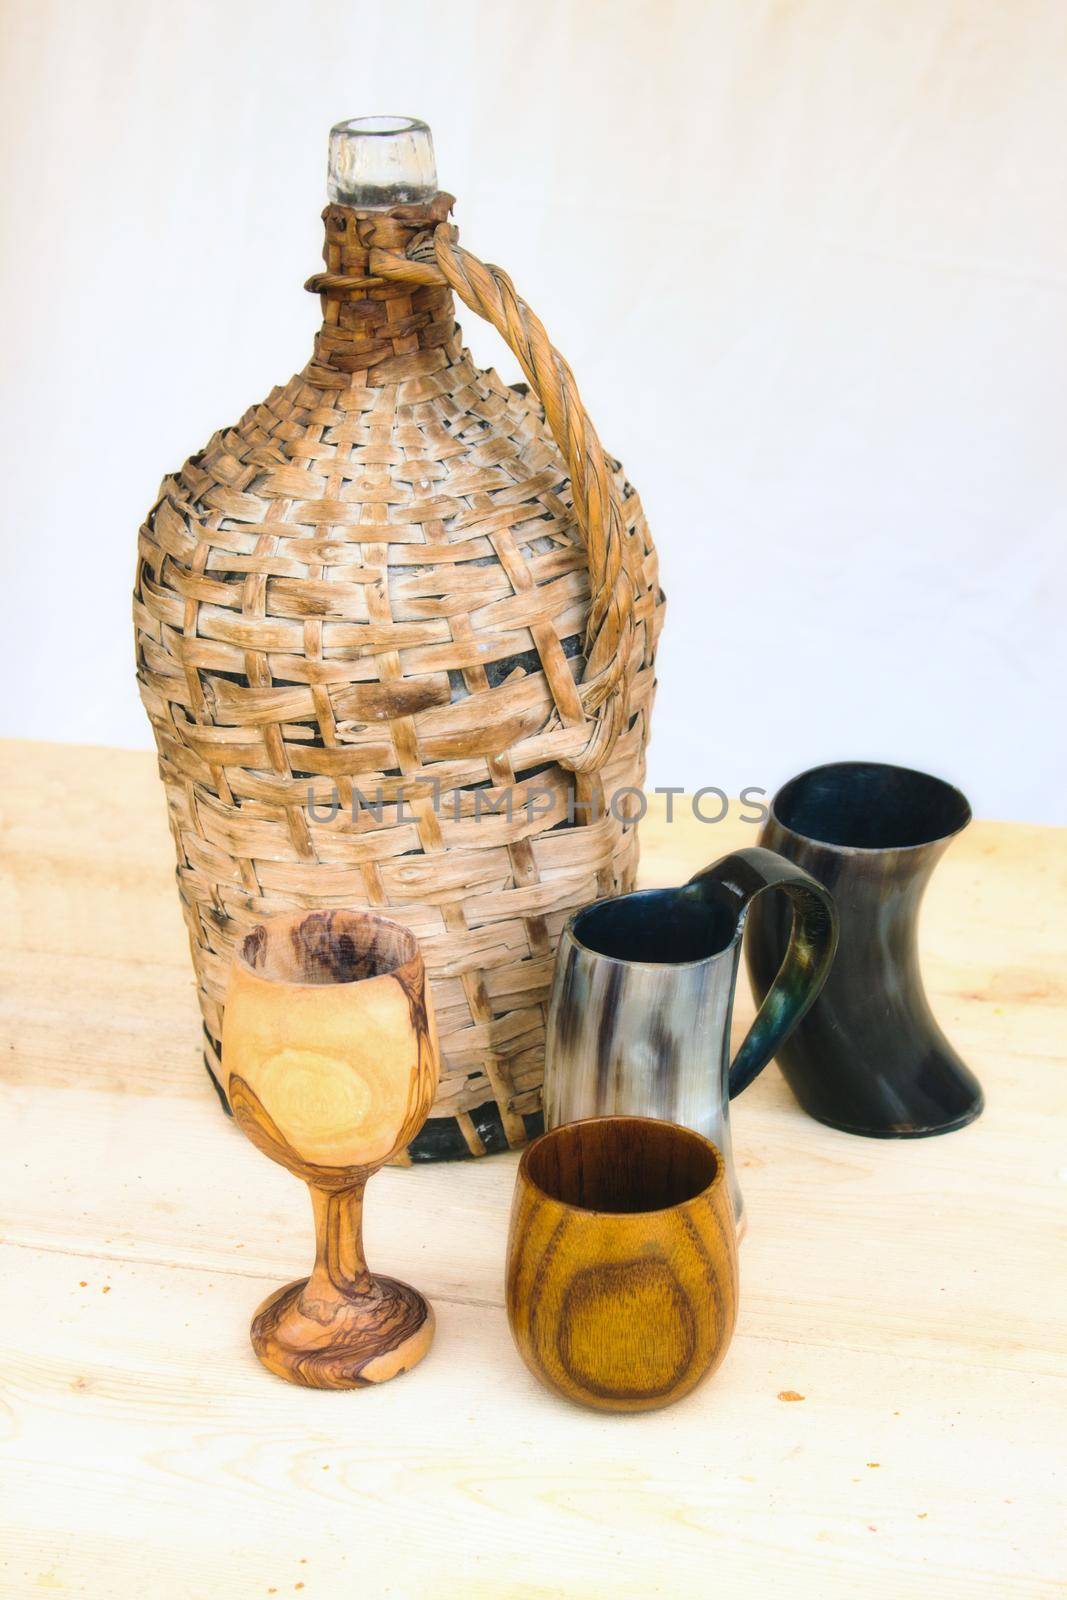 A traditional glass bottle encased in wicker with wooden cups on a table